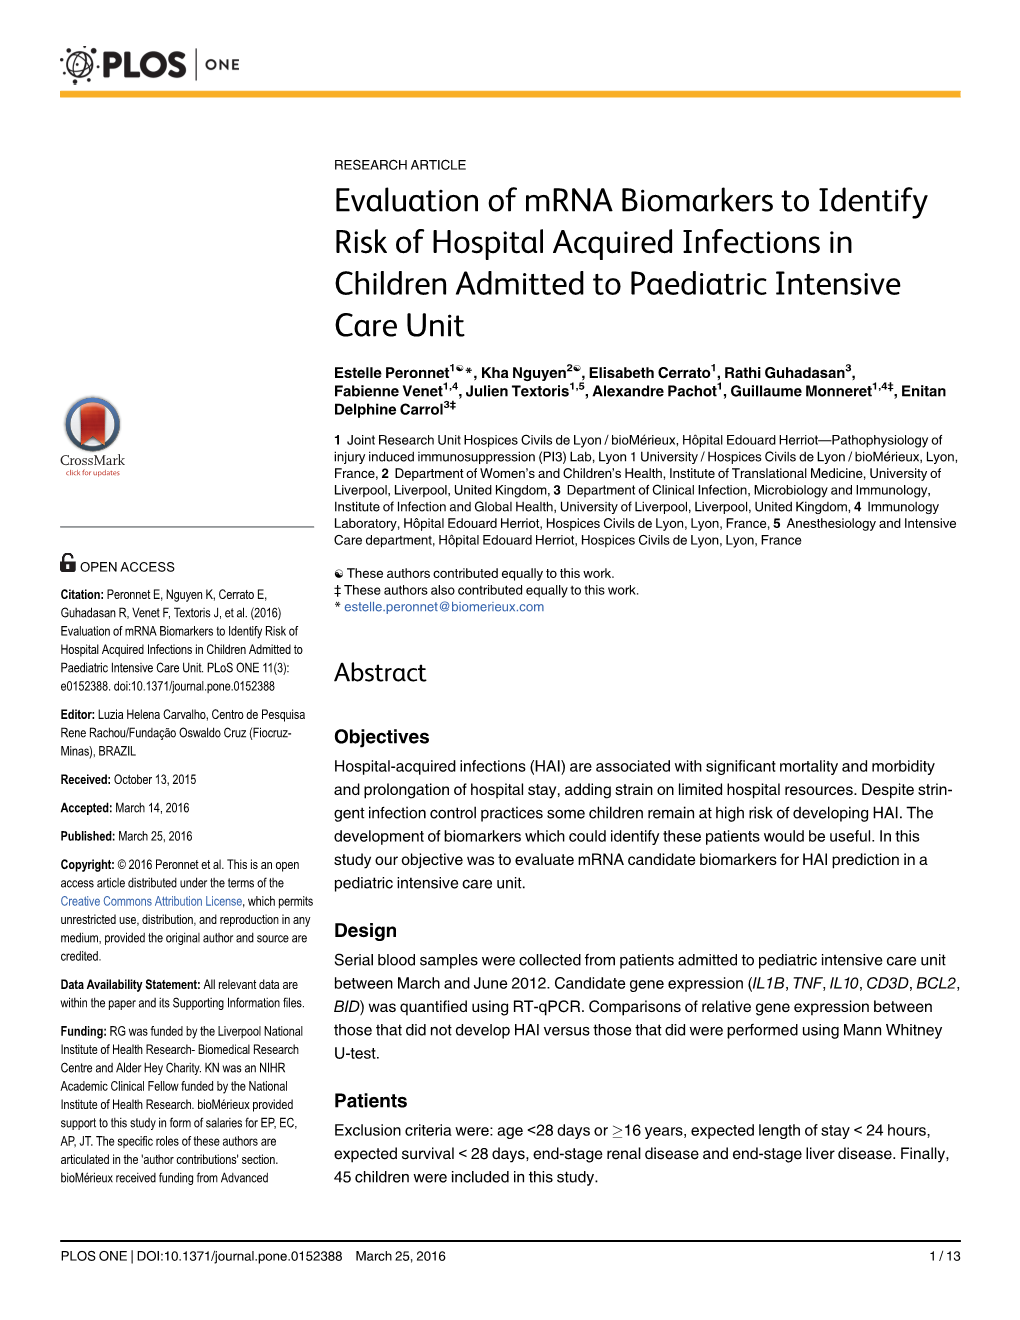 Evaluation of Mrna Biomarkers to Identify Risk of Hospital Acquired Infections in Children Admitted to Paediatric Intensive Care Unit